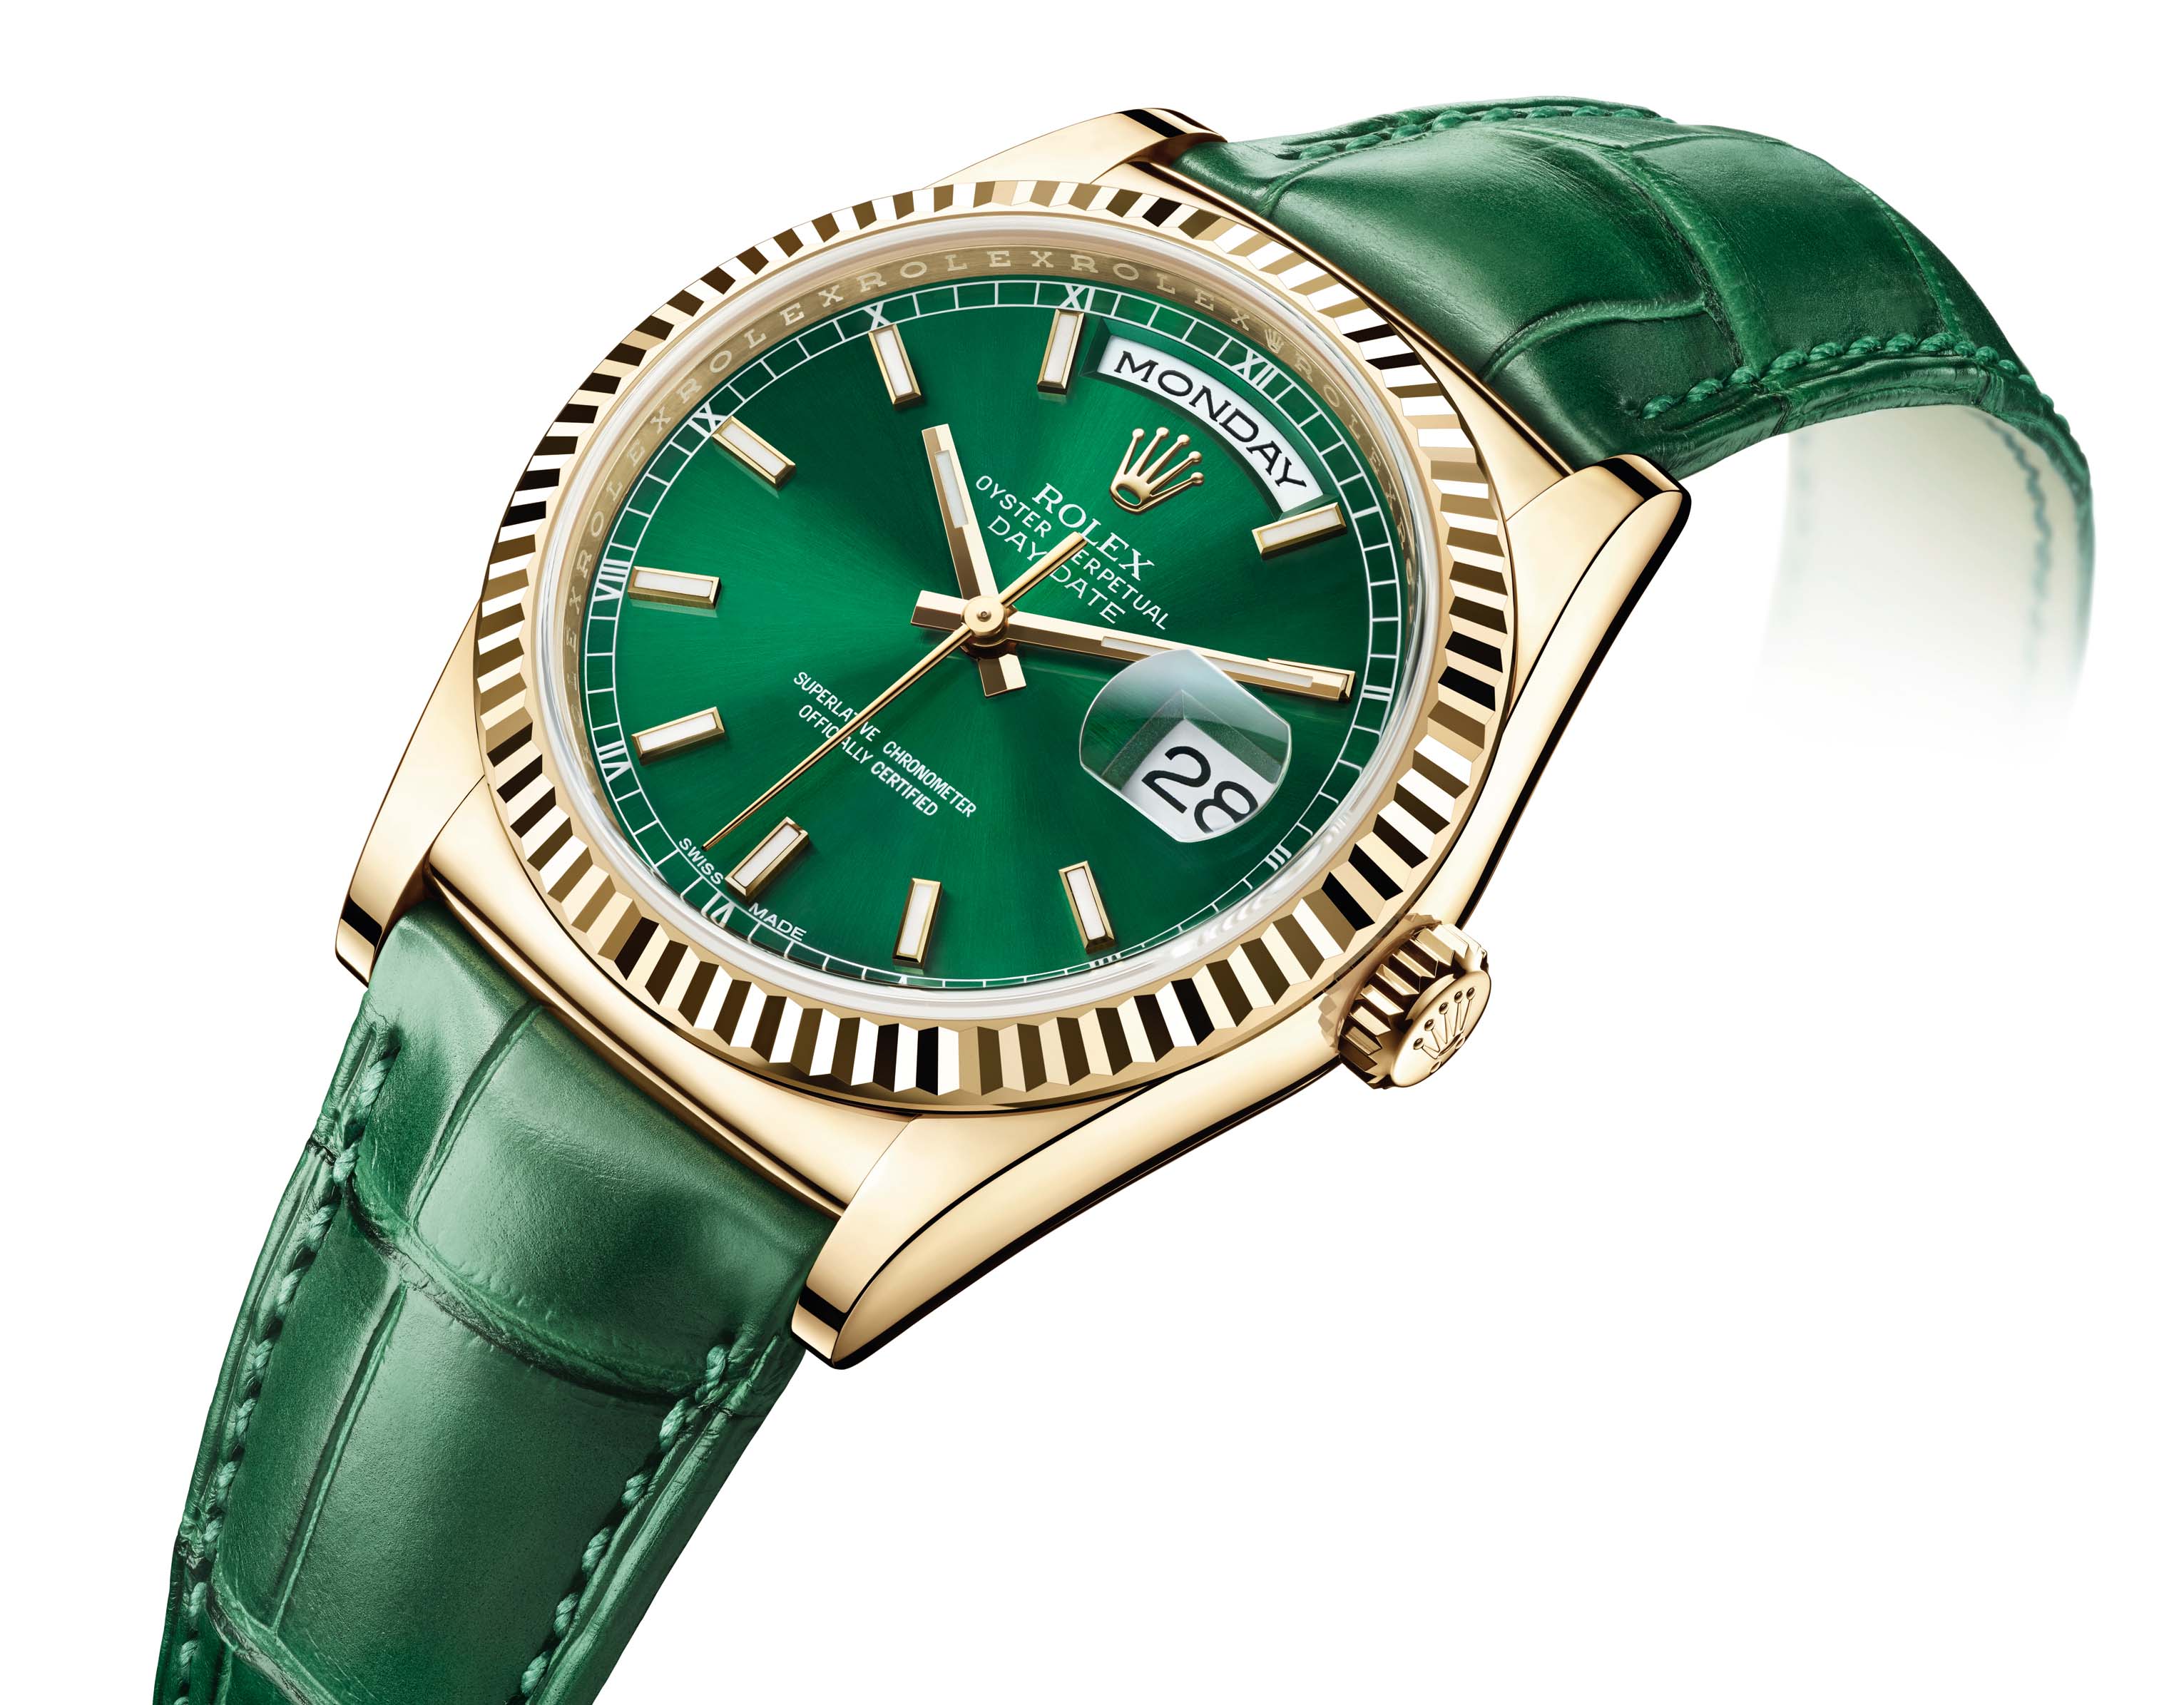 The Rolex Oyster Perpetual: A Timeless Classic